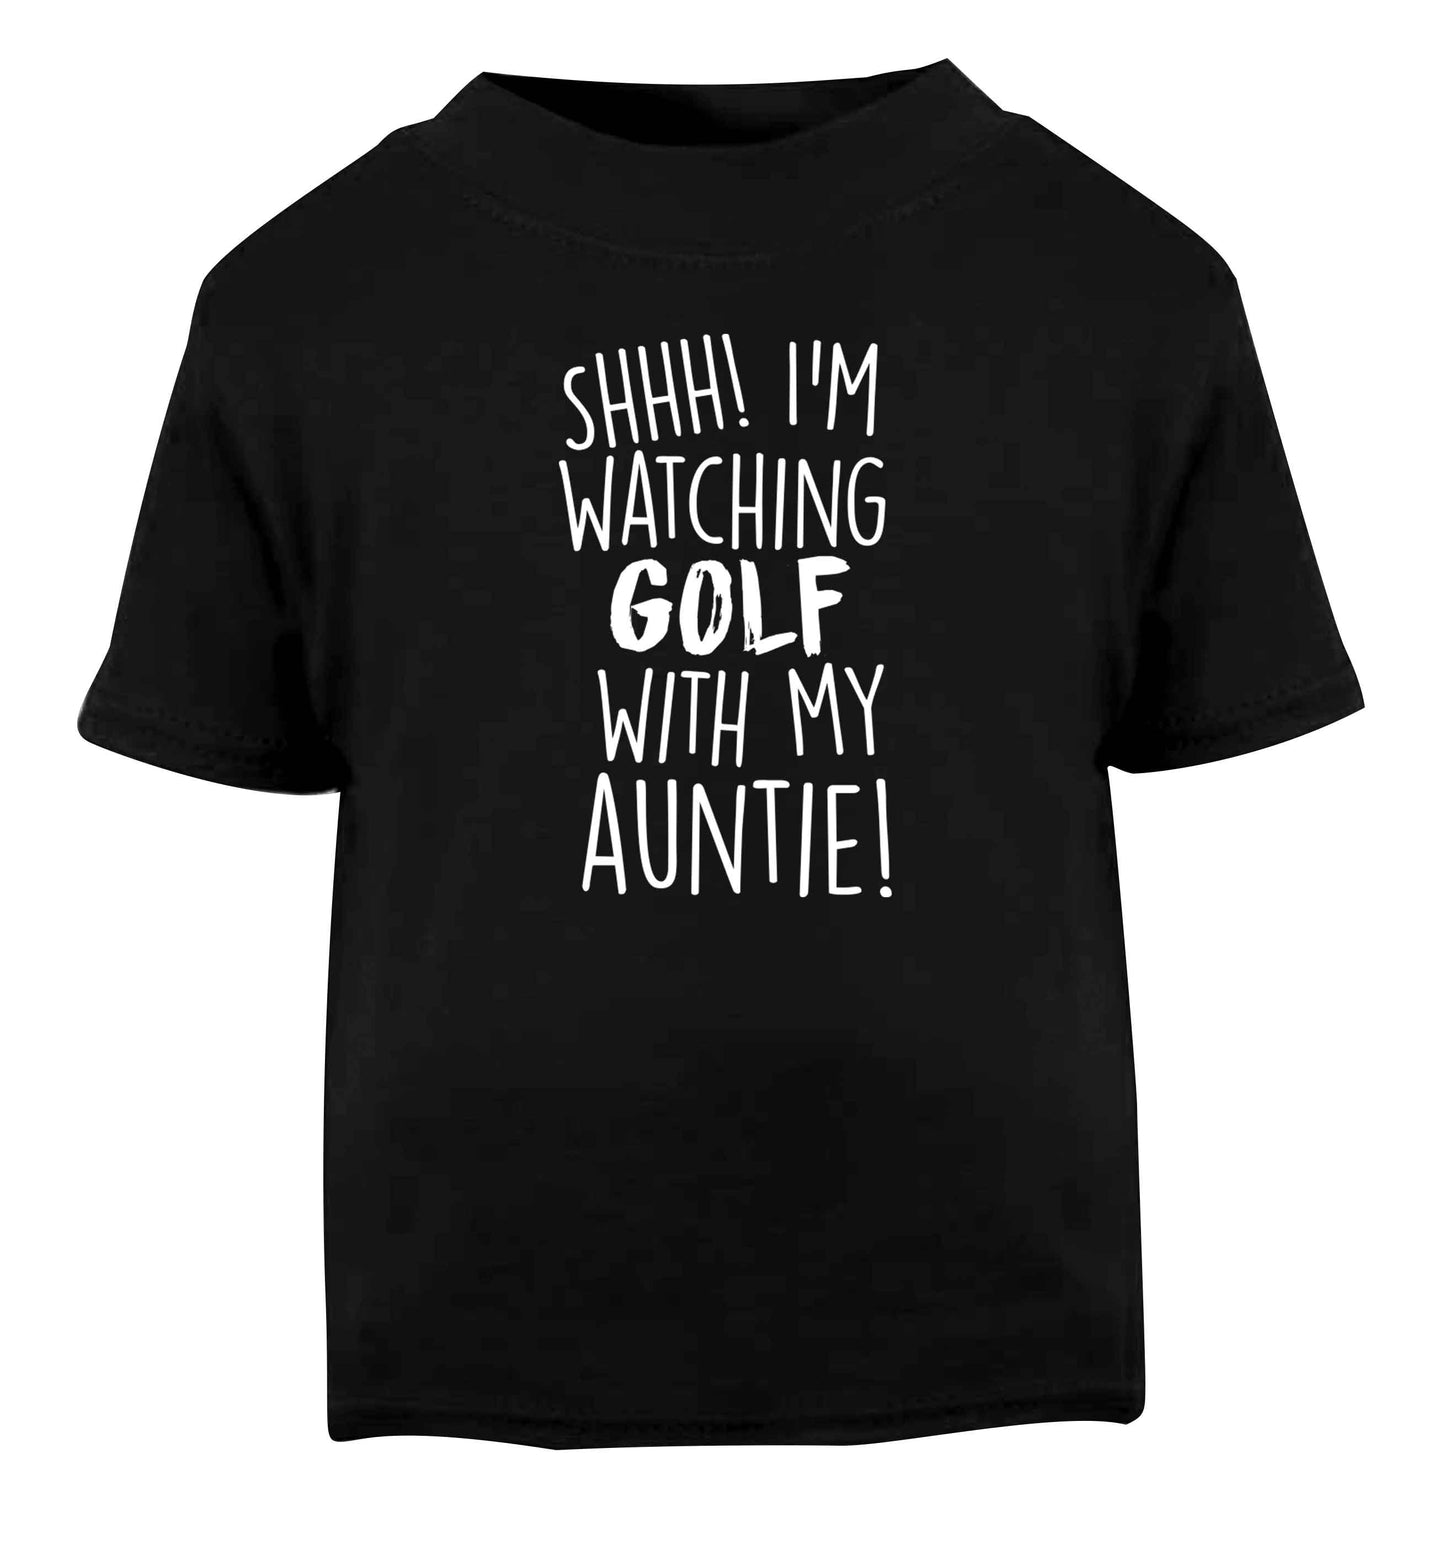 Shh I'm watching golf with my auntie Black Baby Toddler Tshirt 2 years